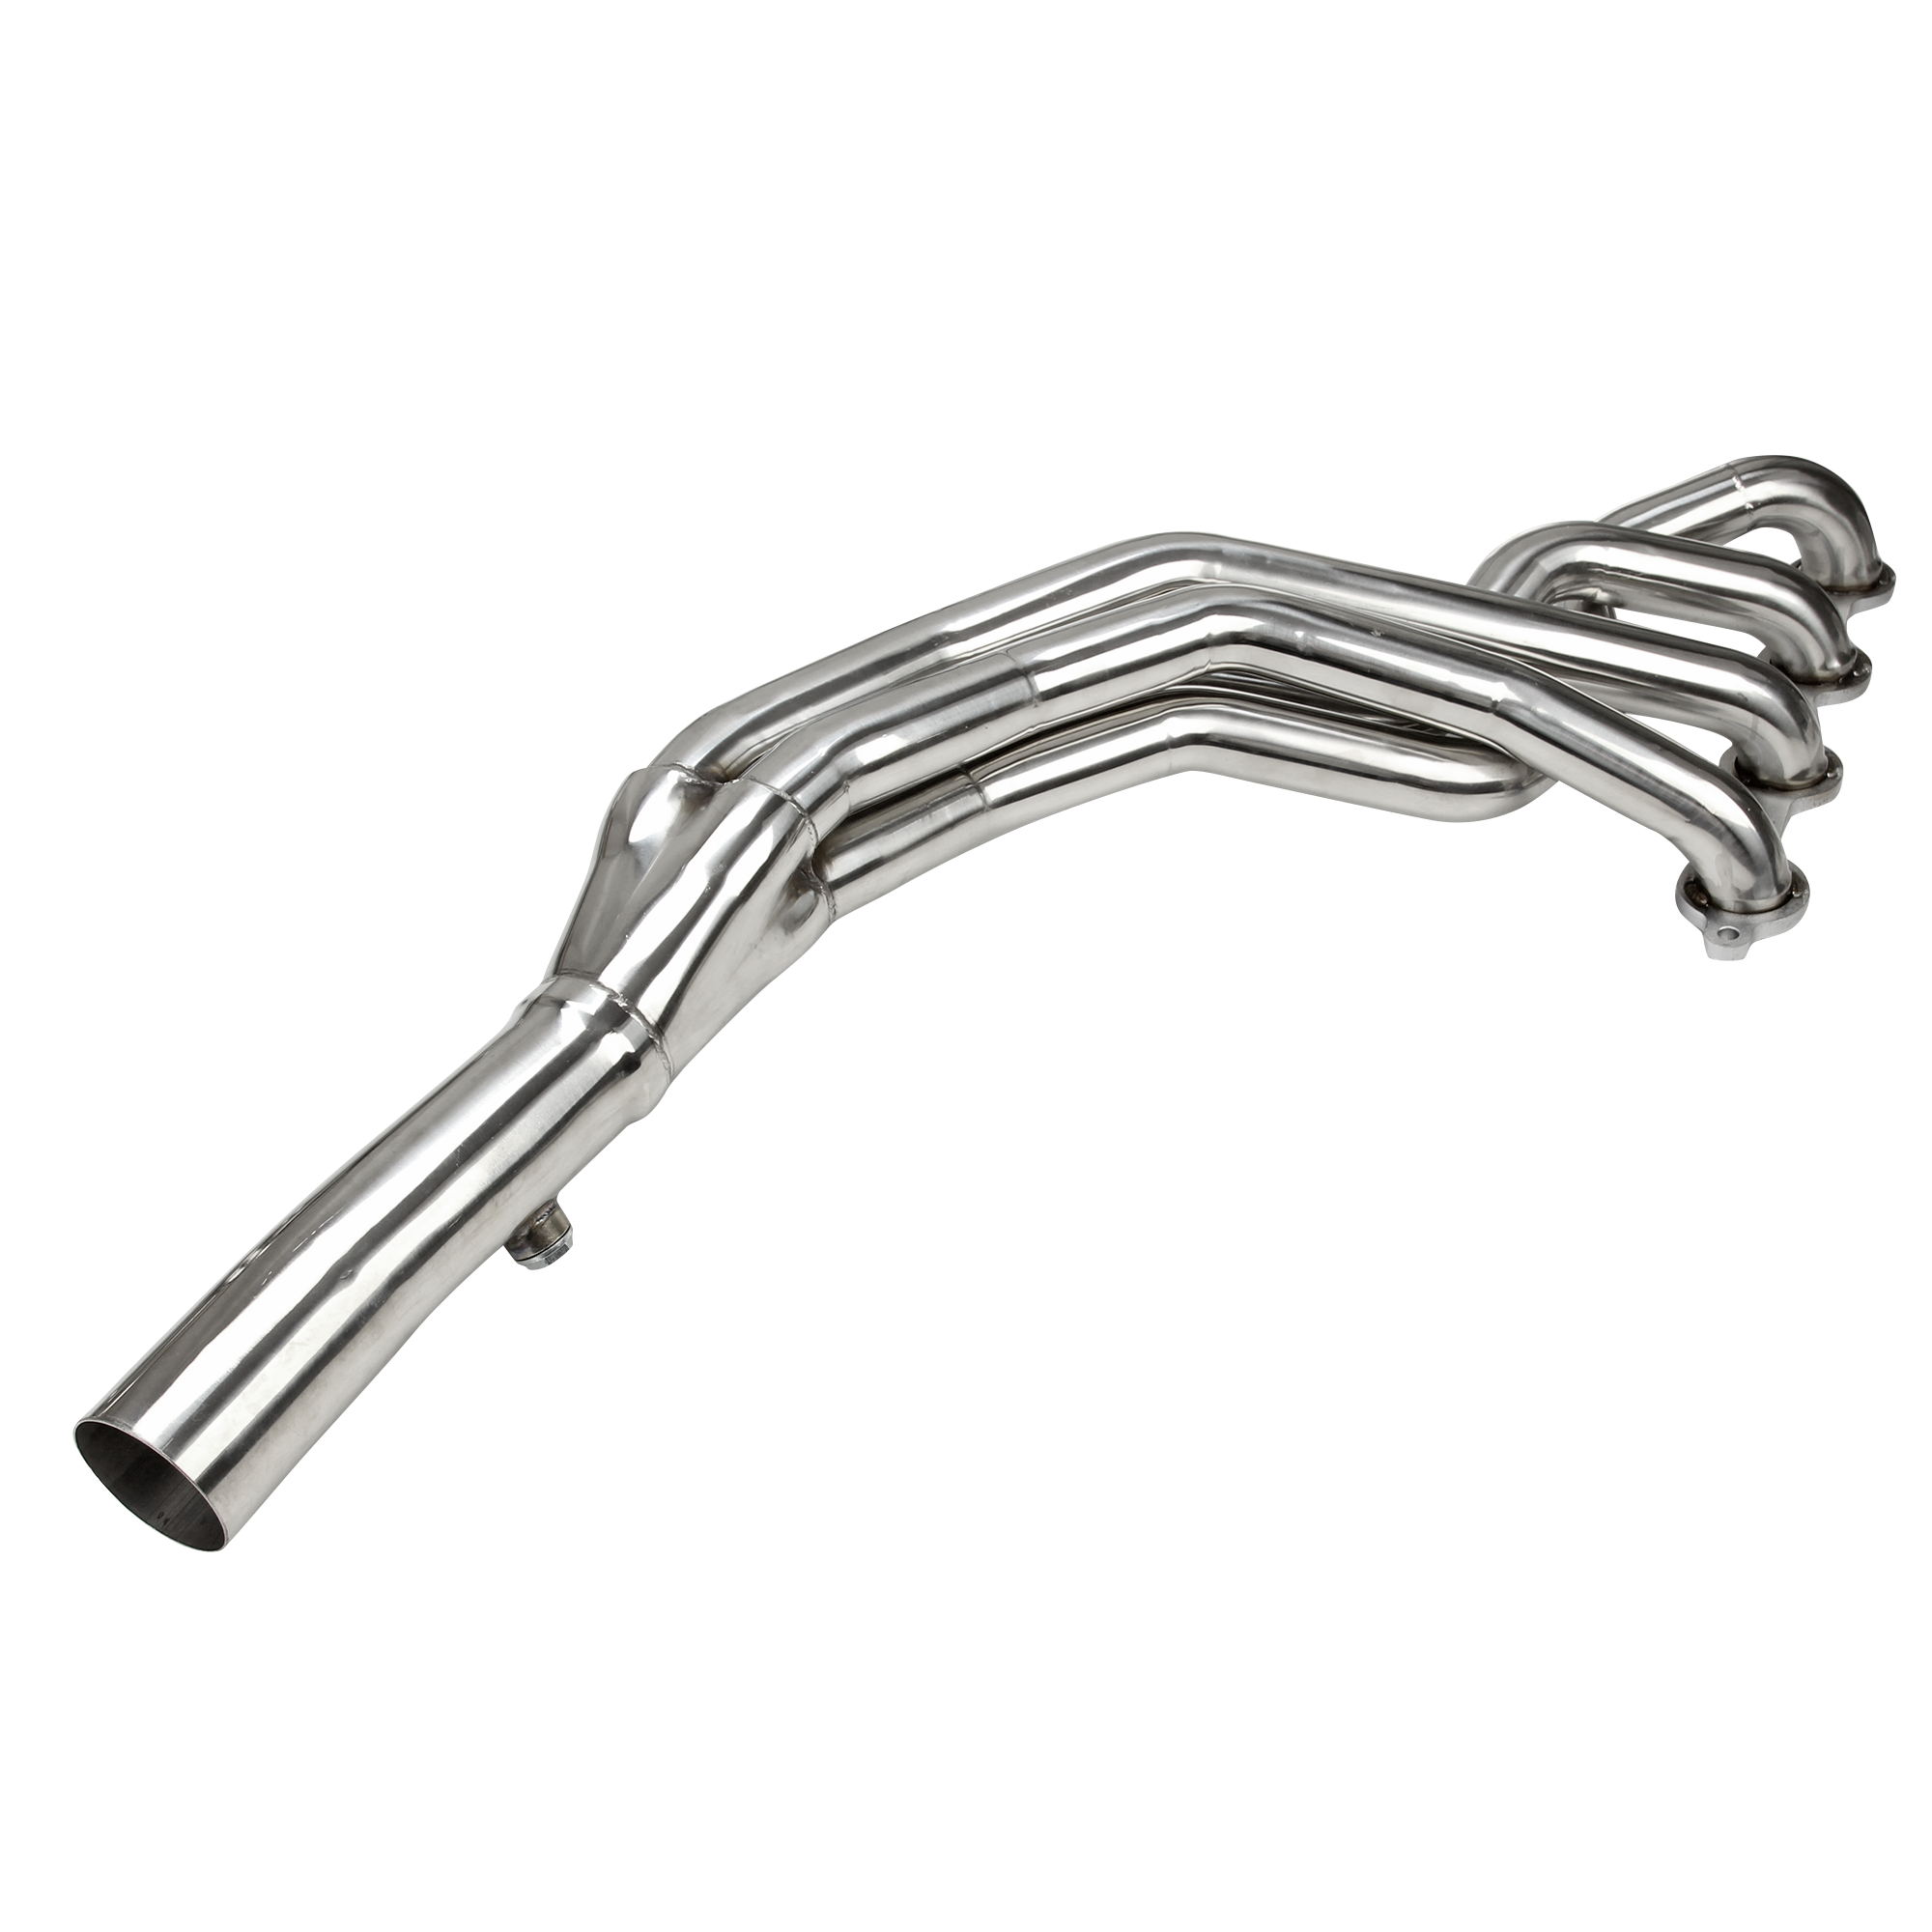 Exhaust Header for Chevy Camaro SS, 6.2L V8, Pair 